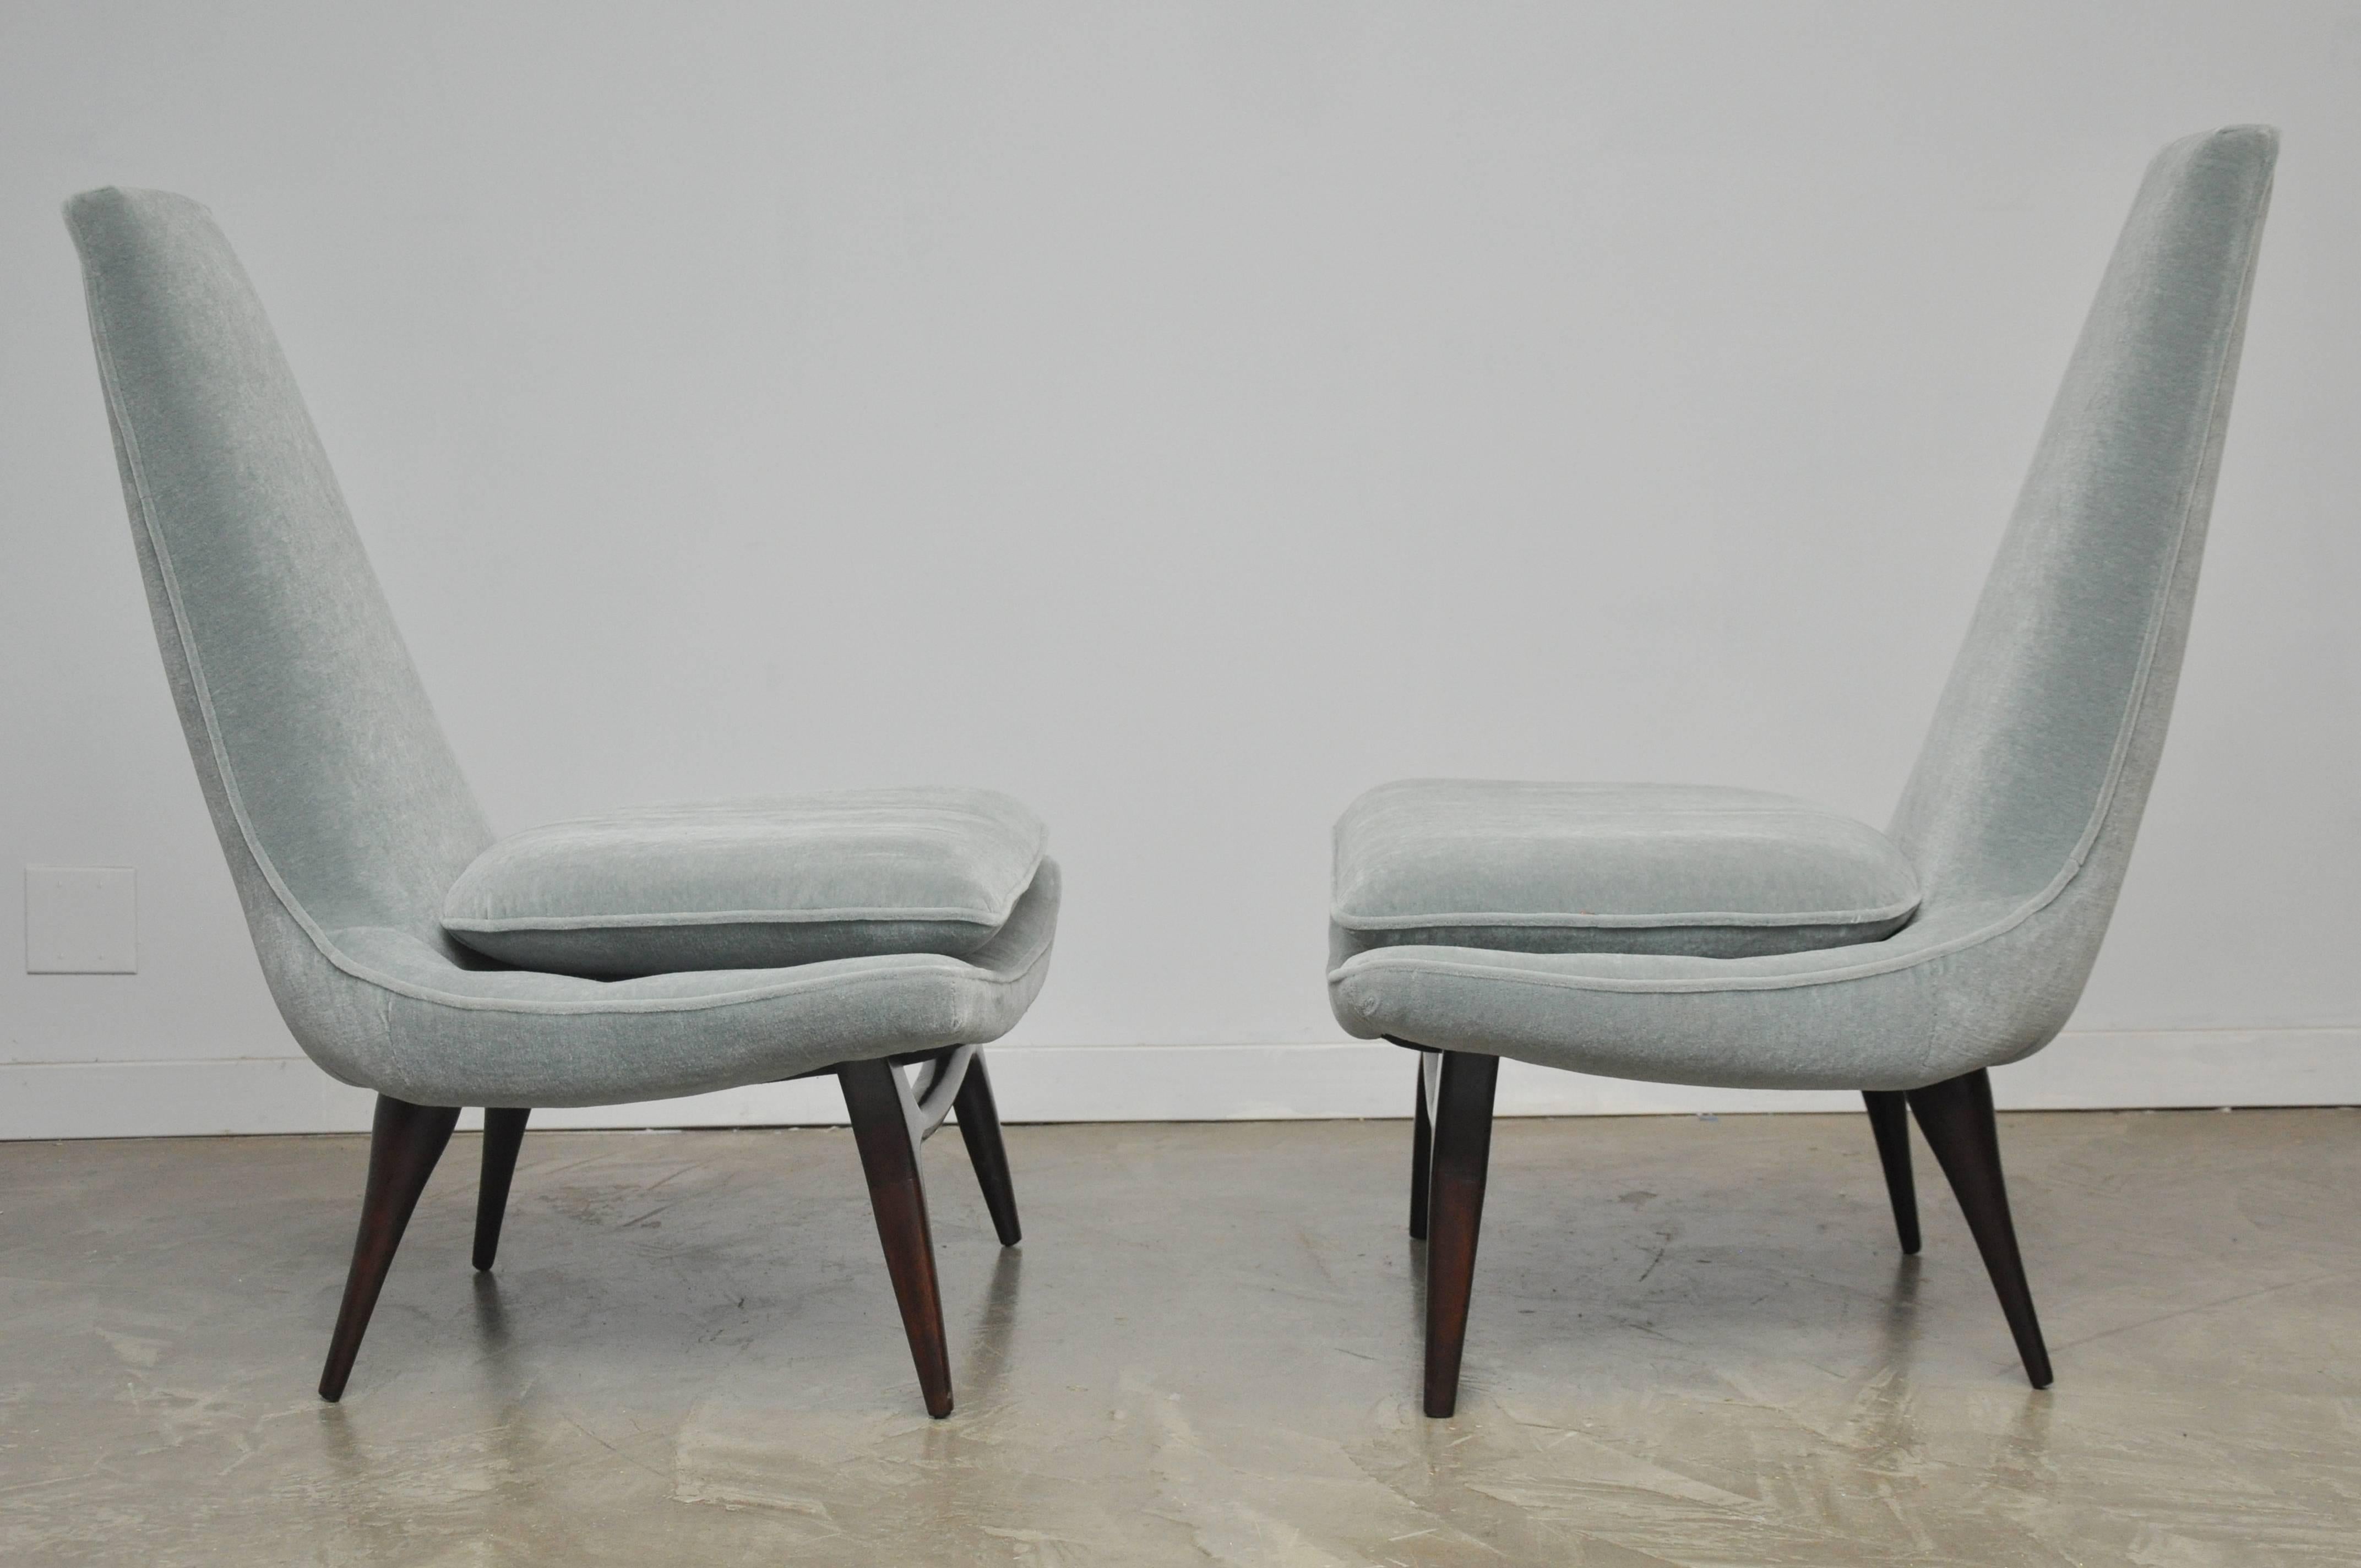 Pair of high back lounge chairs by Karpen of Ca. New mohair upholstery over refinished legs.